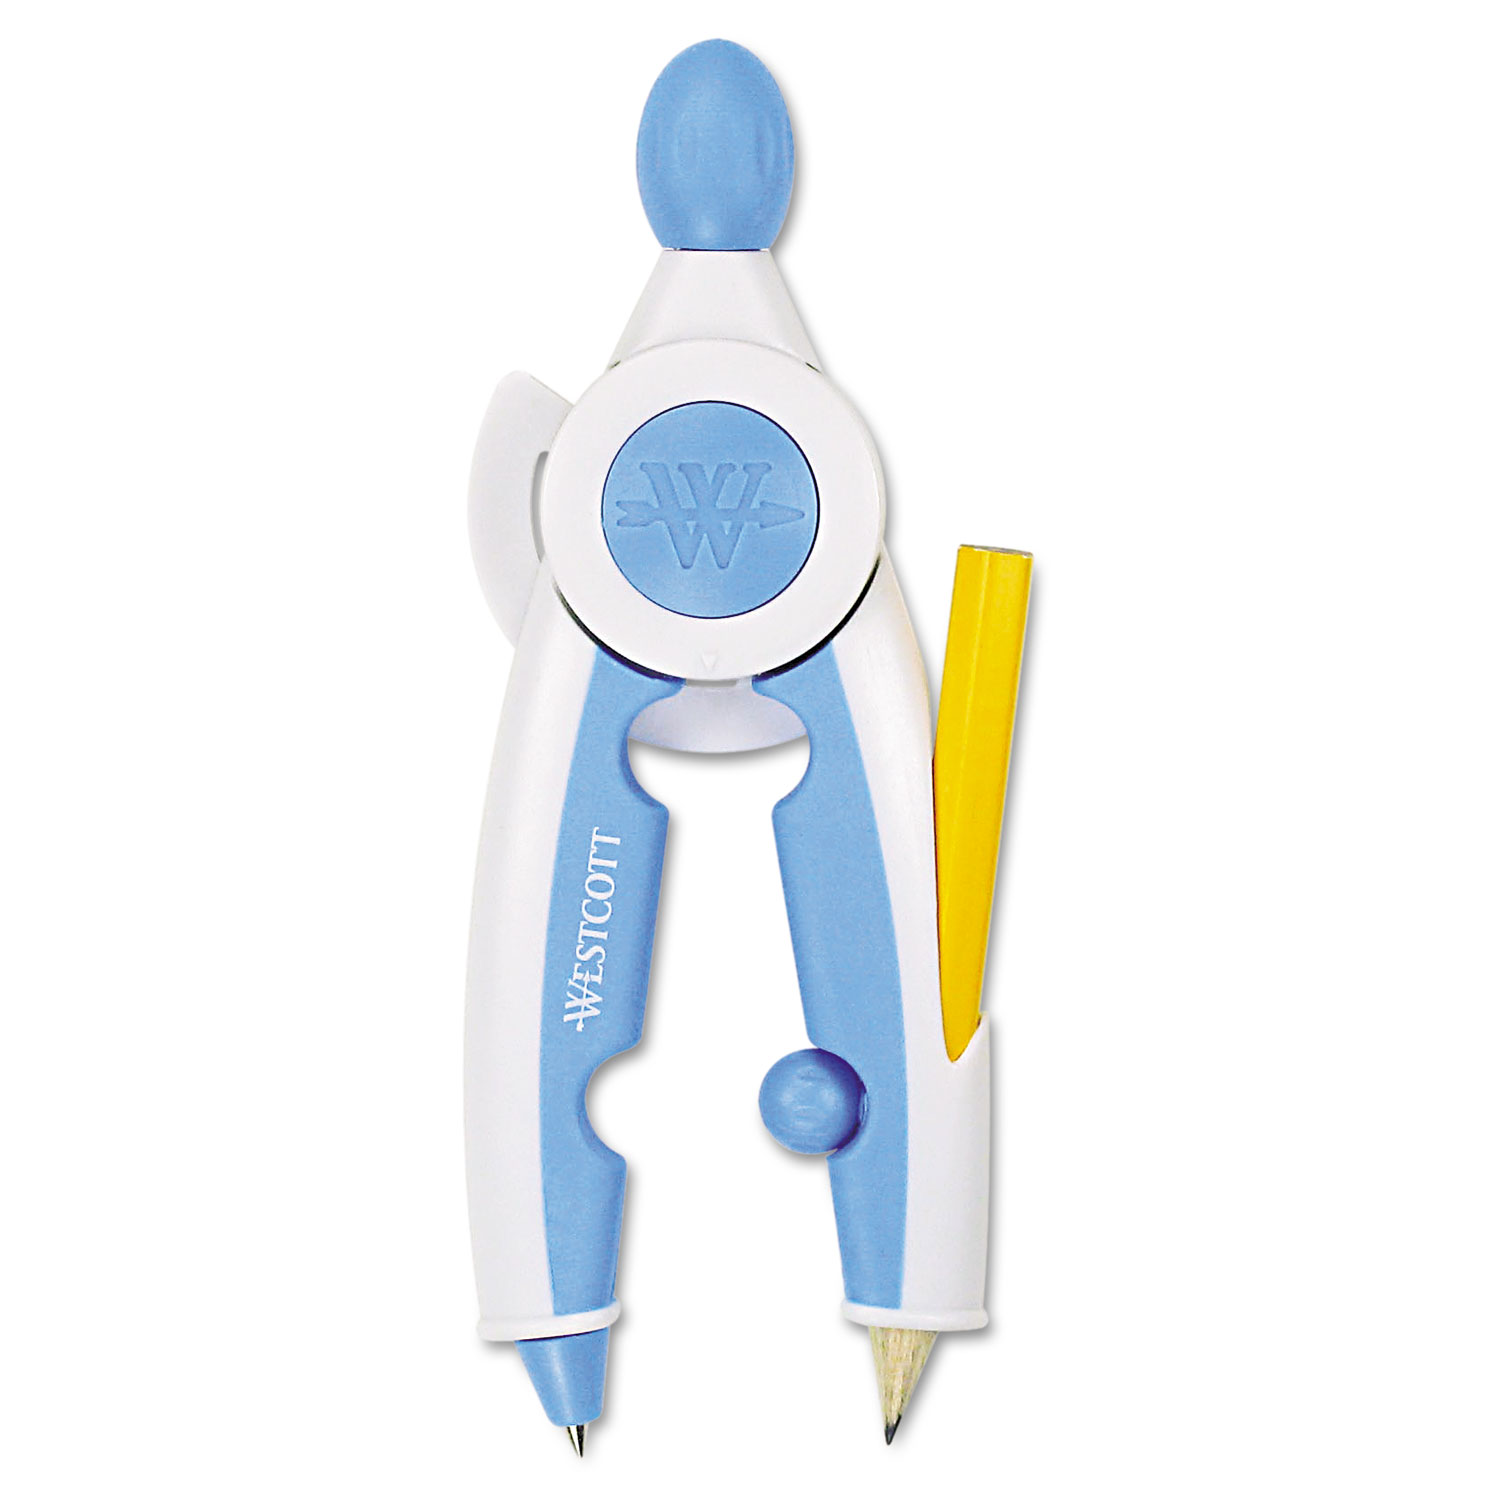  Westcott 14377 Soft Touch School Compass With Microban Protection, Assorted Colors (ACM14377) 